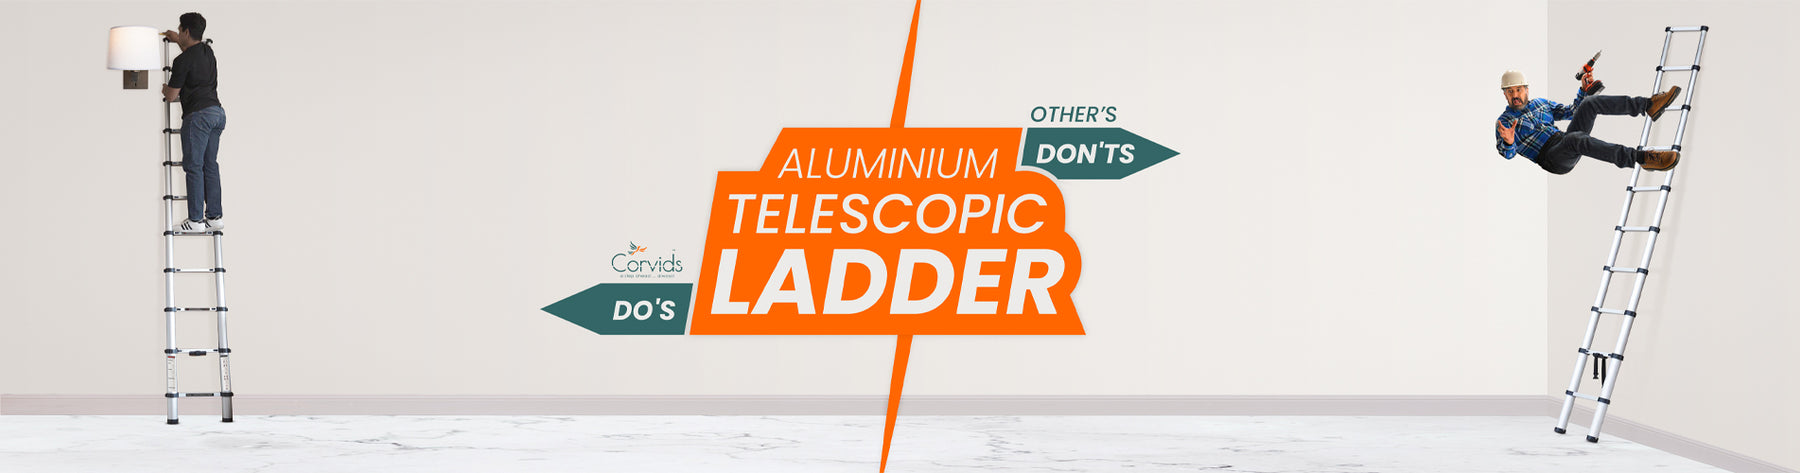 Telescopic ladder do's and don'ts 